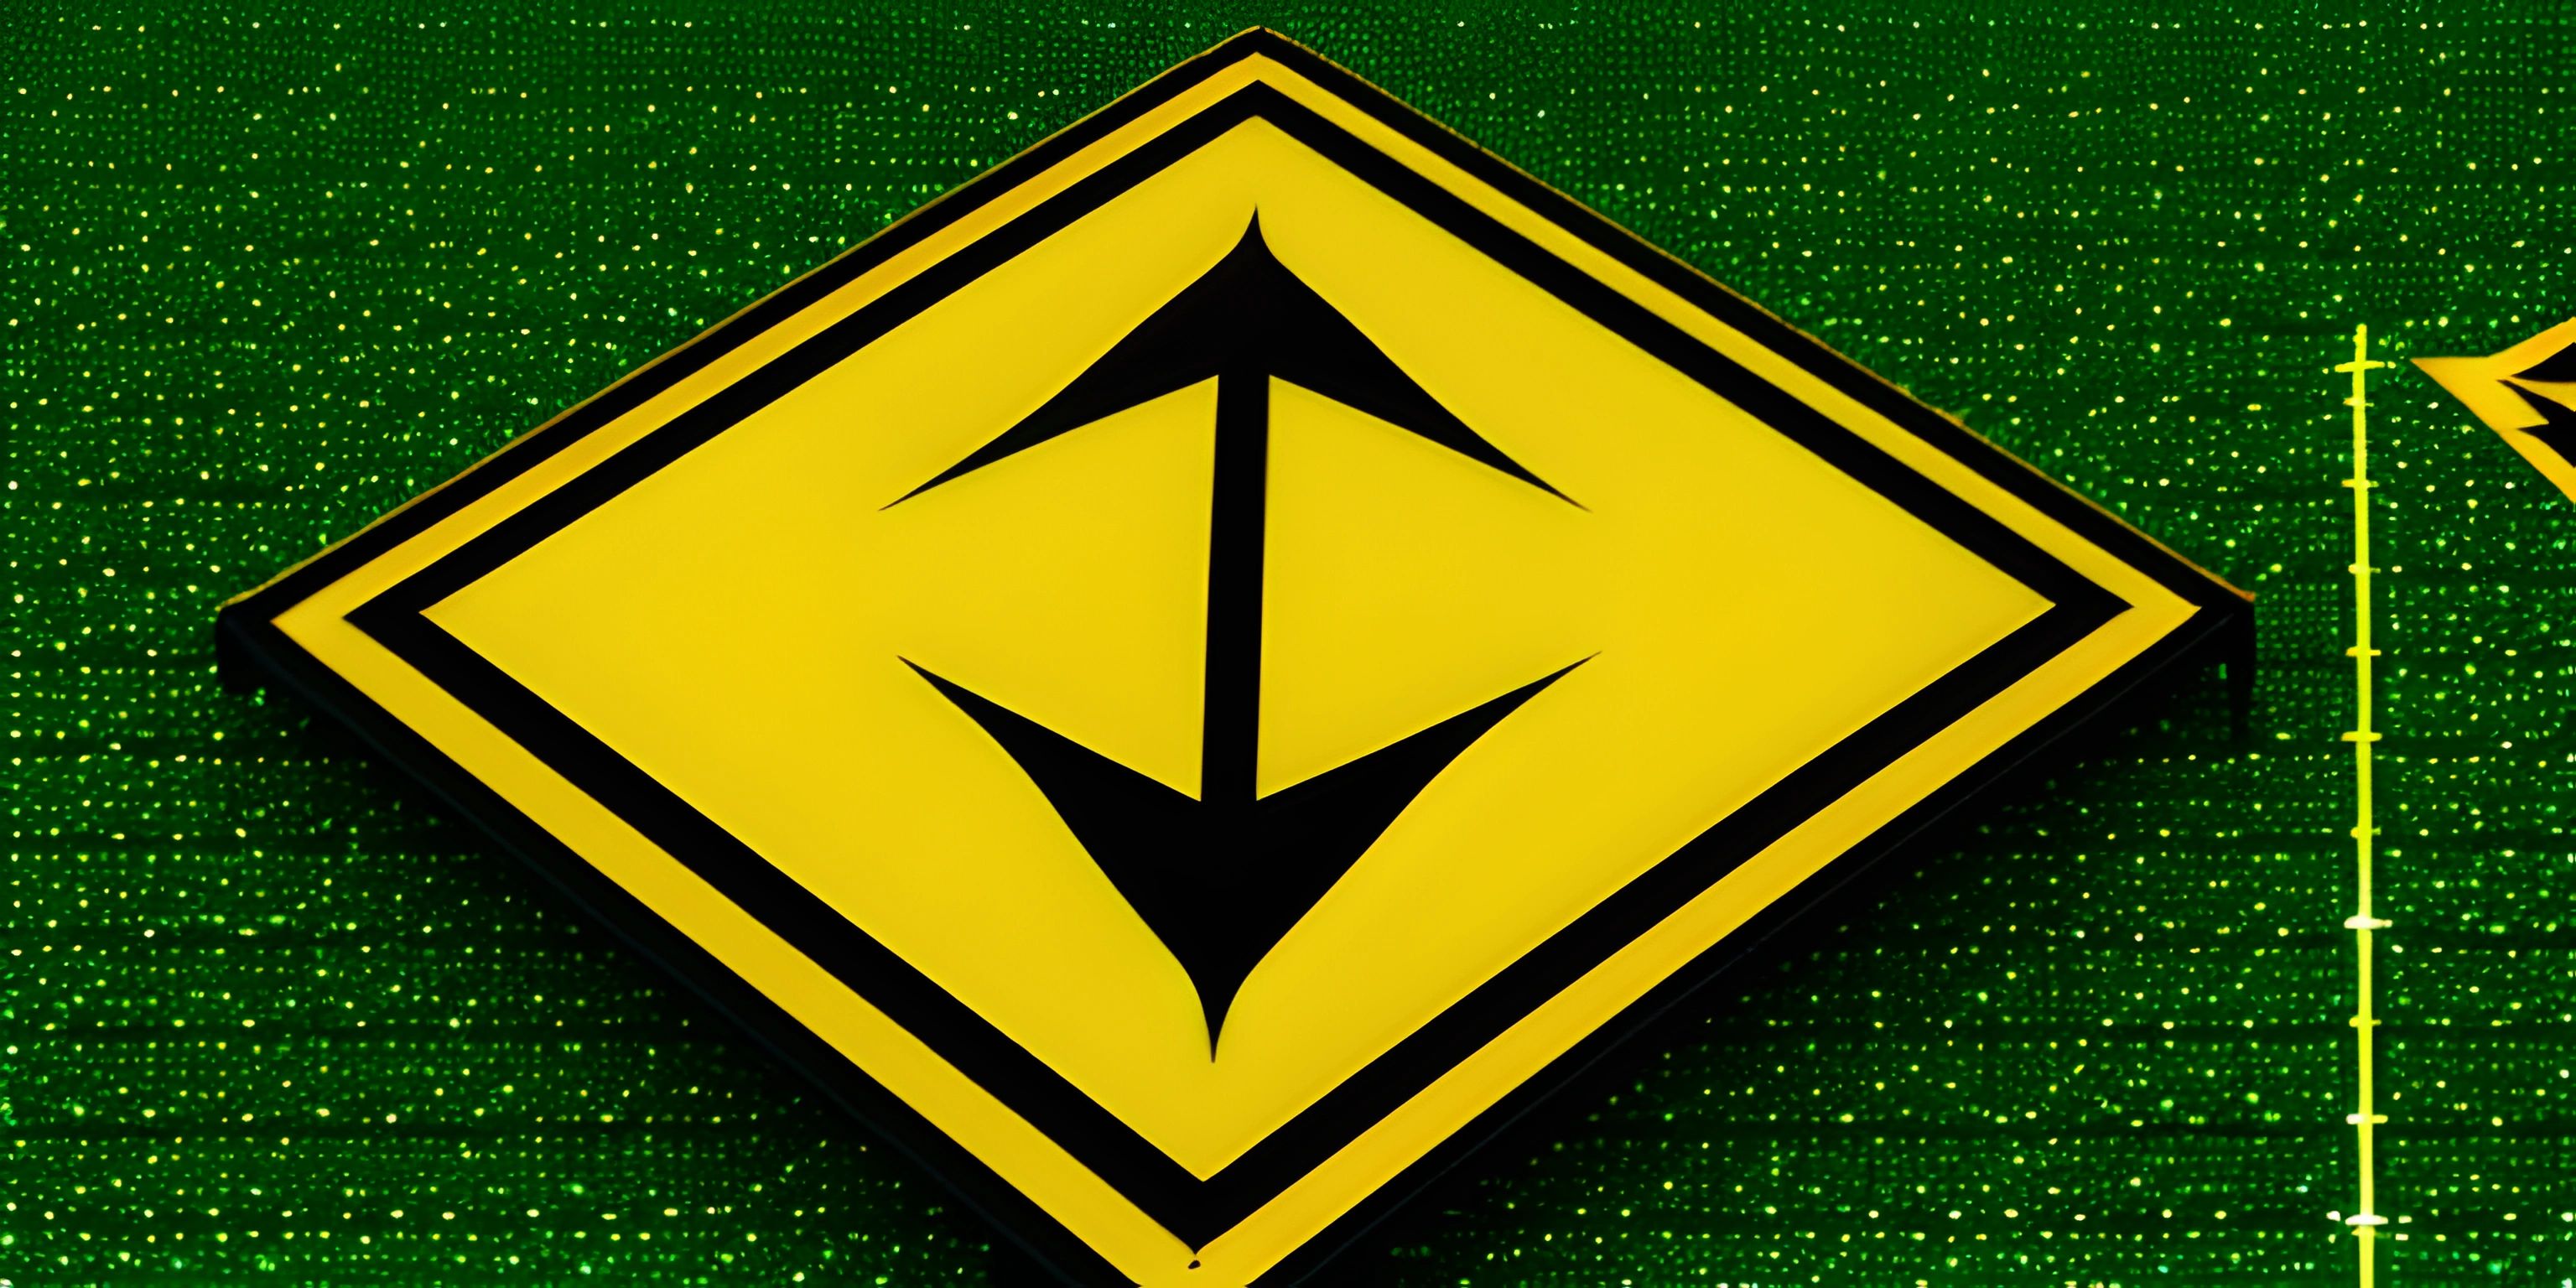 a large sign indicates that an arrow is going right ahead on the road sign on a green background